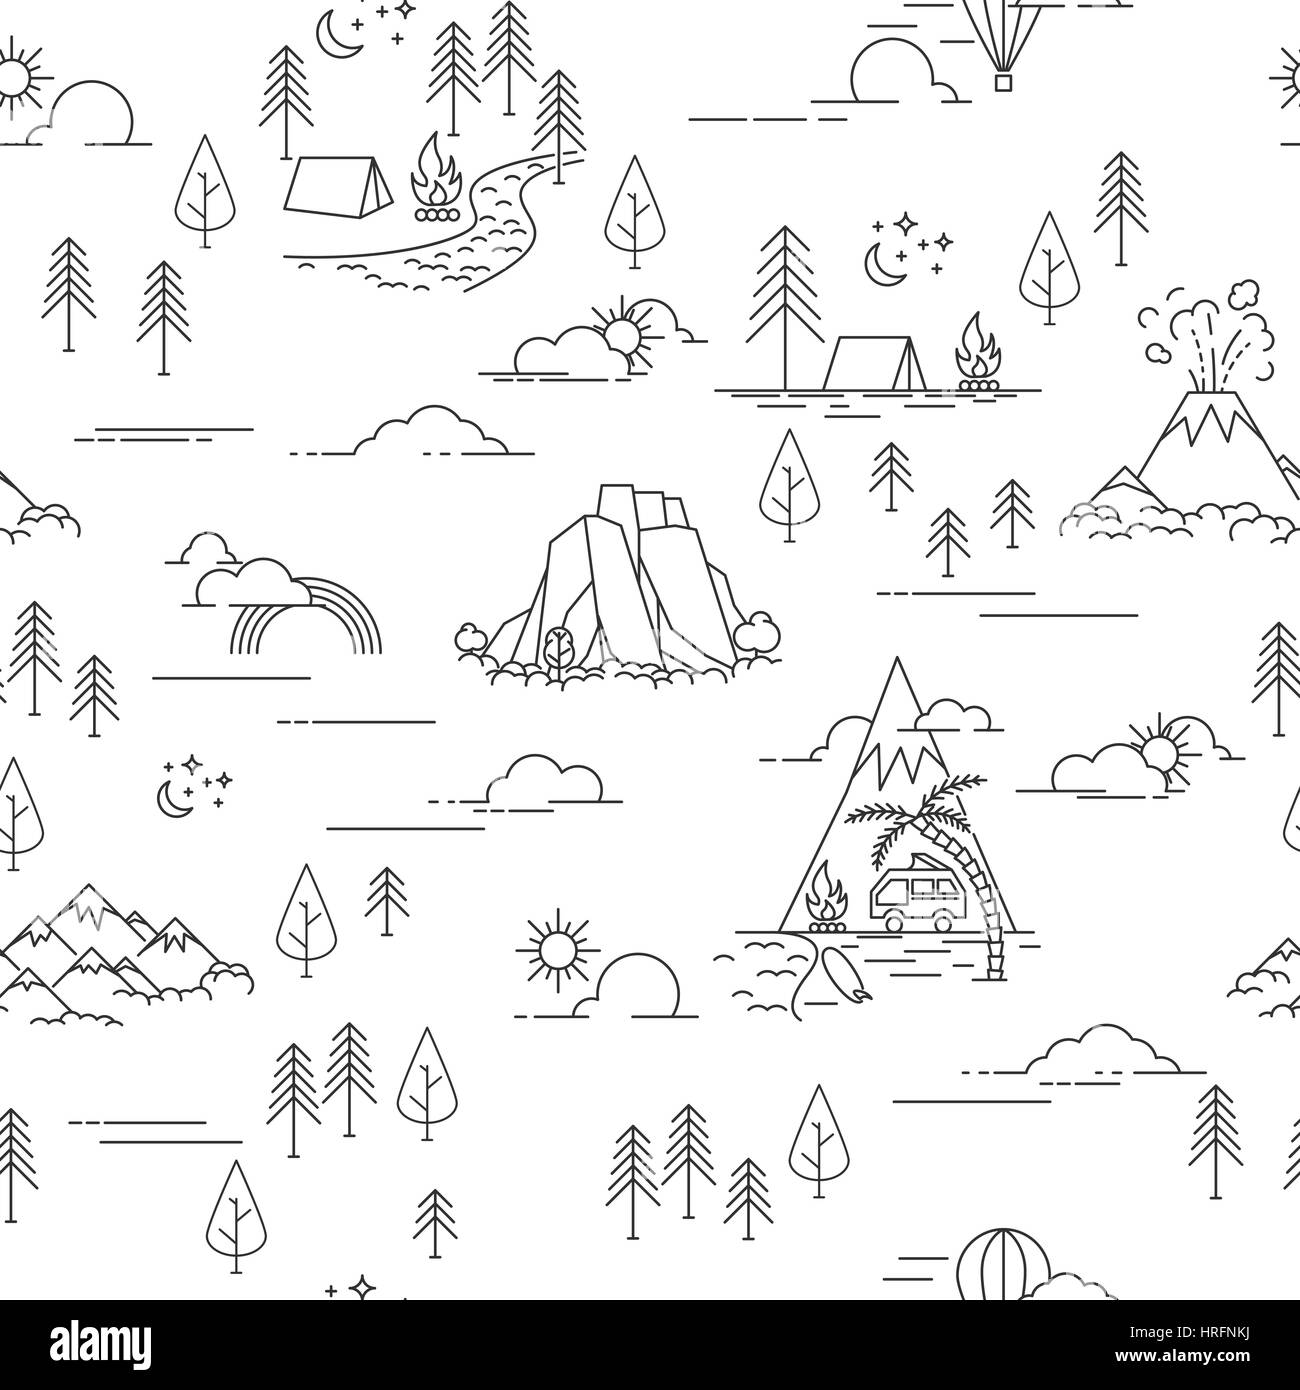 Pattern with hiking and landscape elements Stock Vector